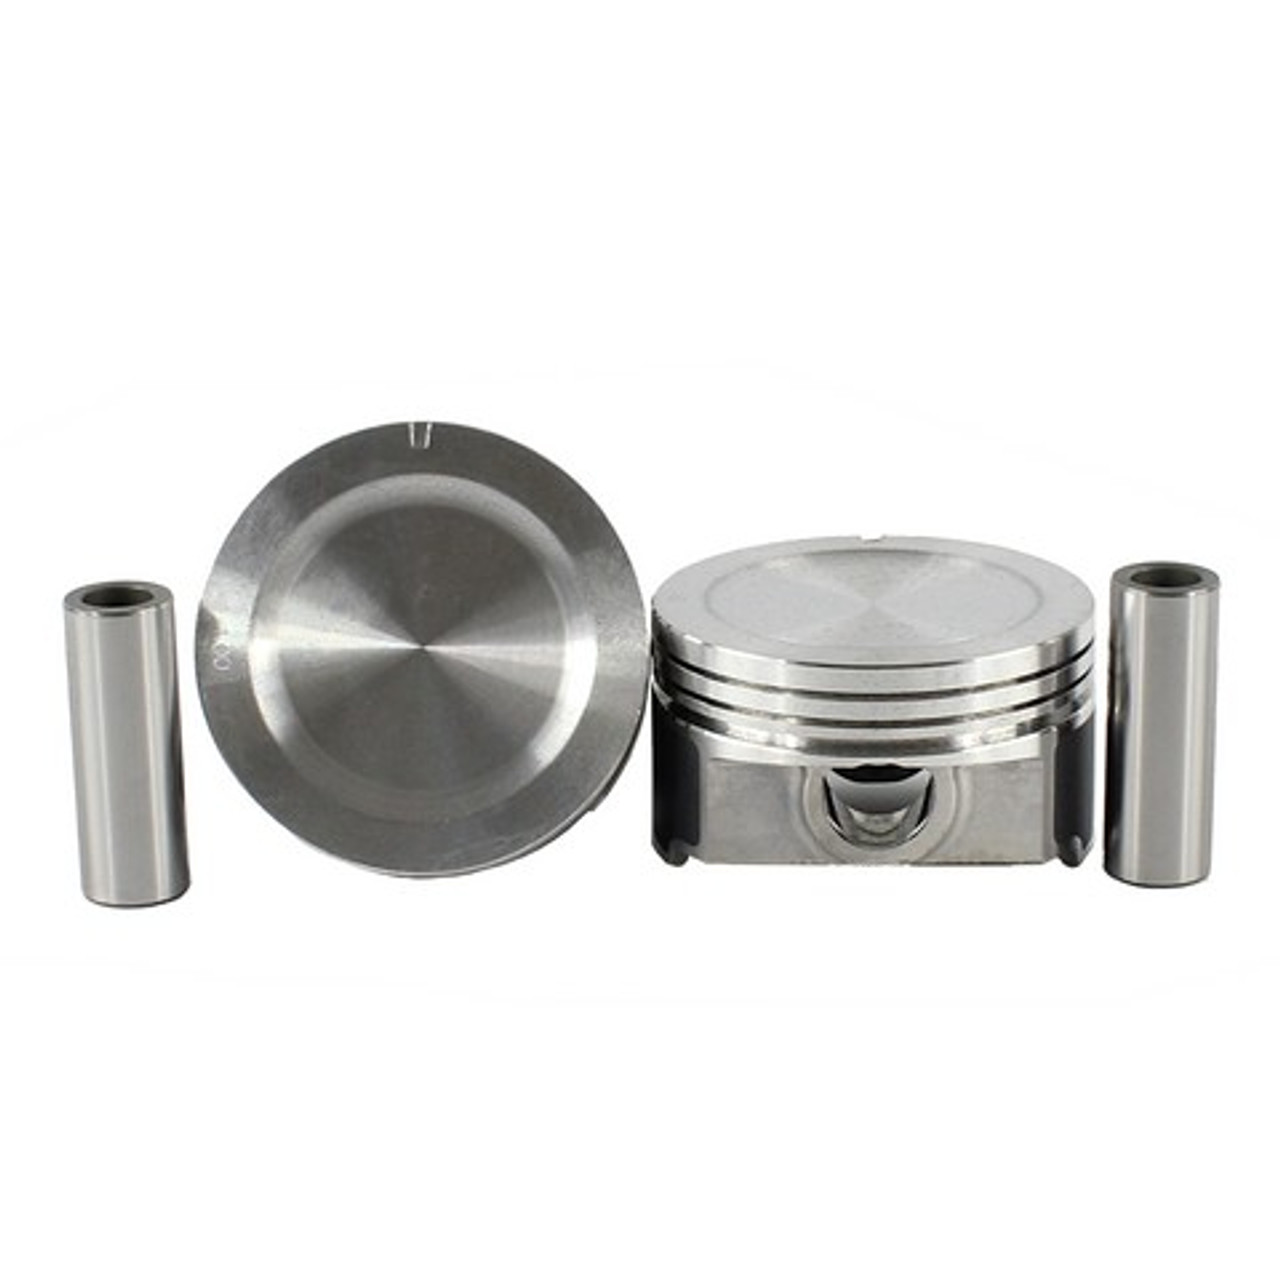 Piston Set 5.4L 1998 Ford Expedition - P4160.74